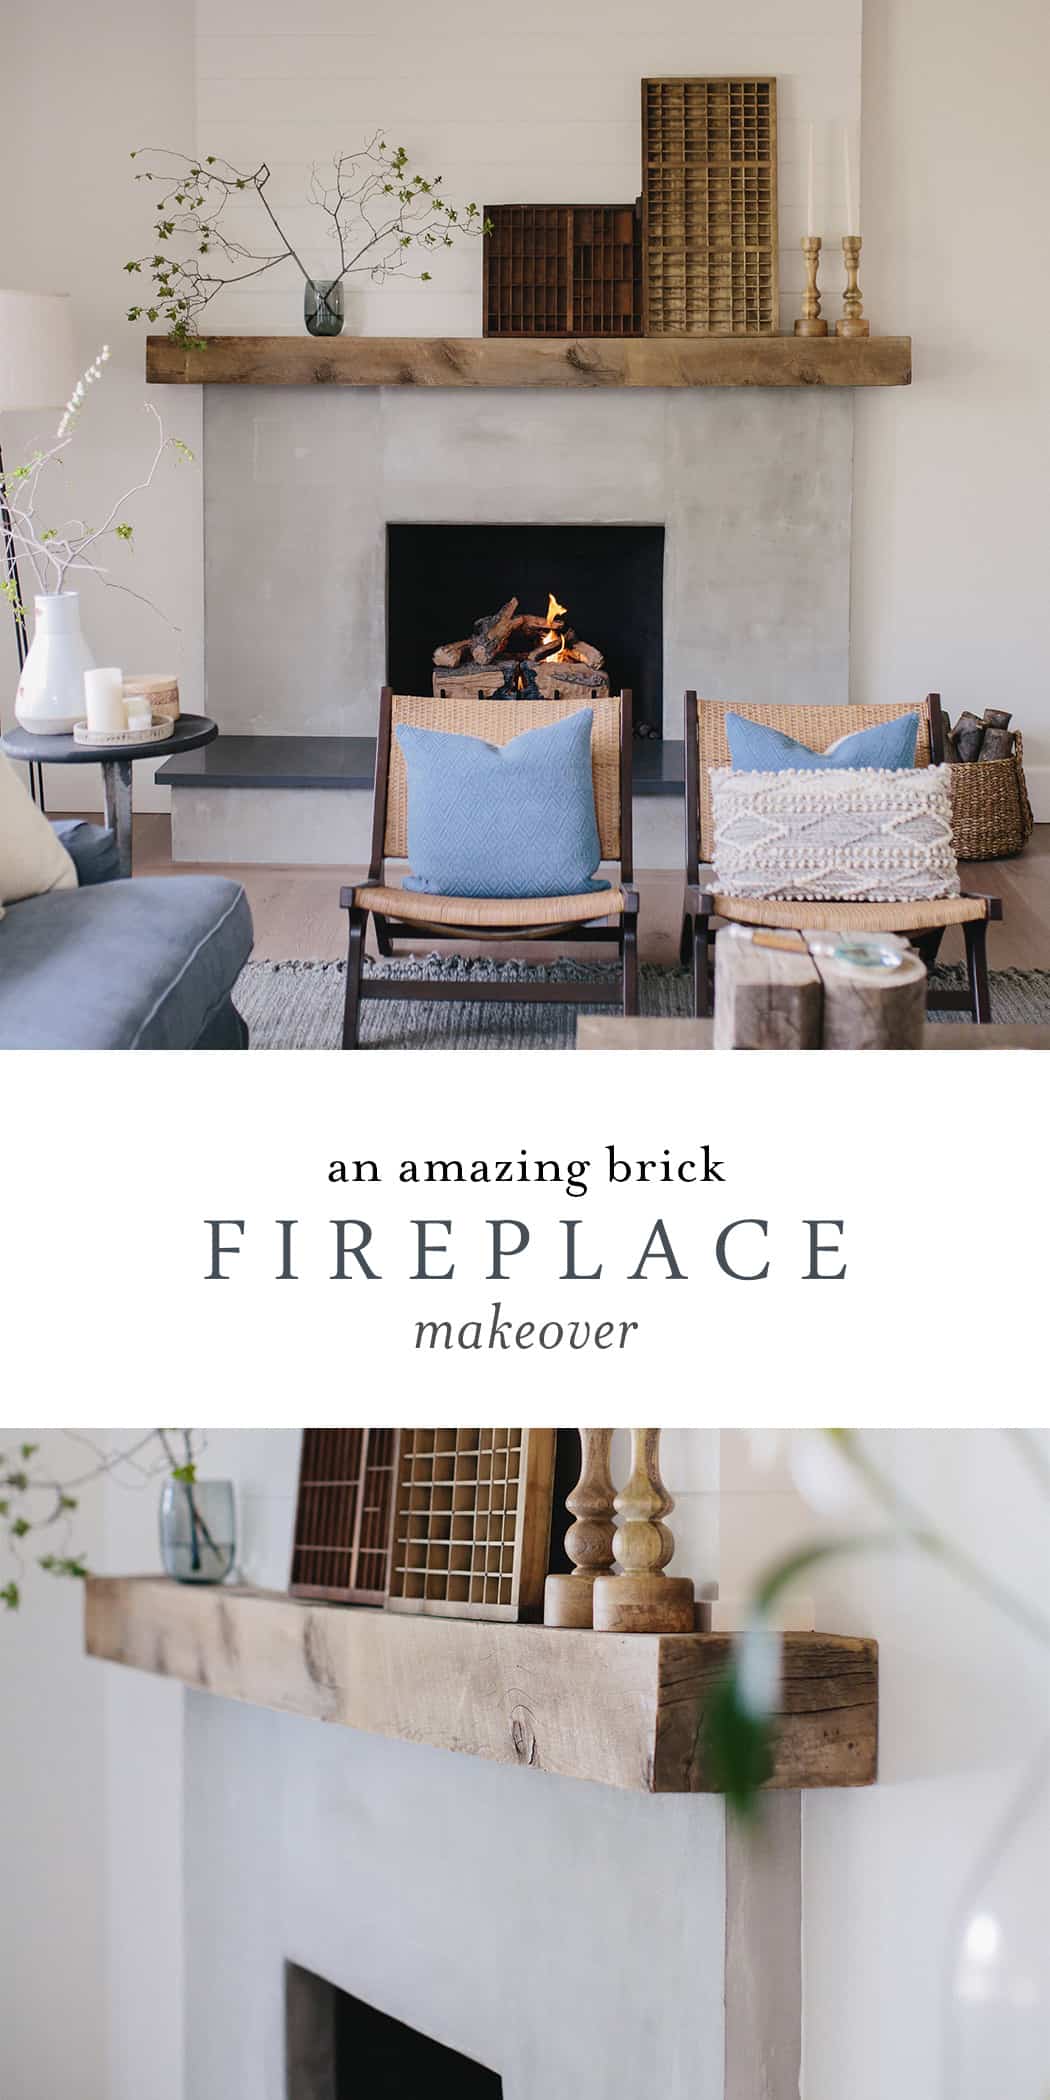 Brick Fireplace Update Using Cement And, How To Cover Up Old Brick Fireplace